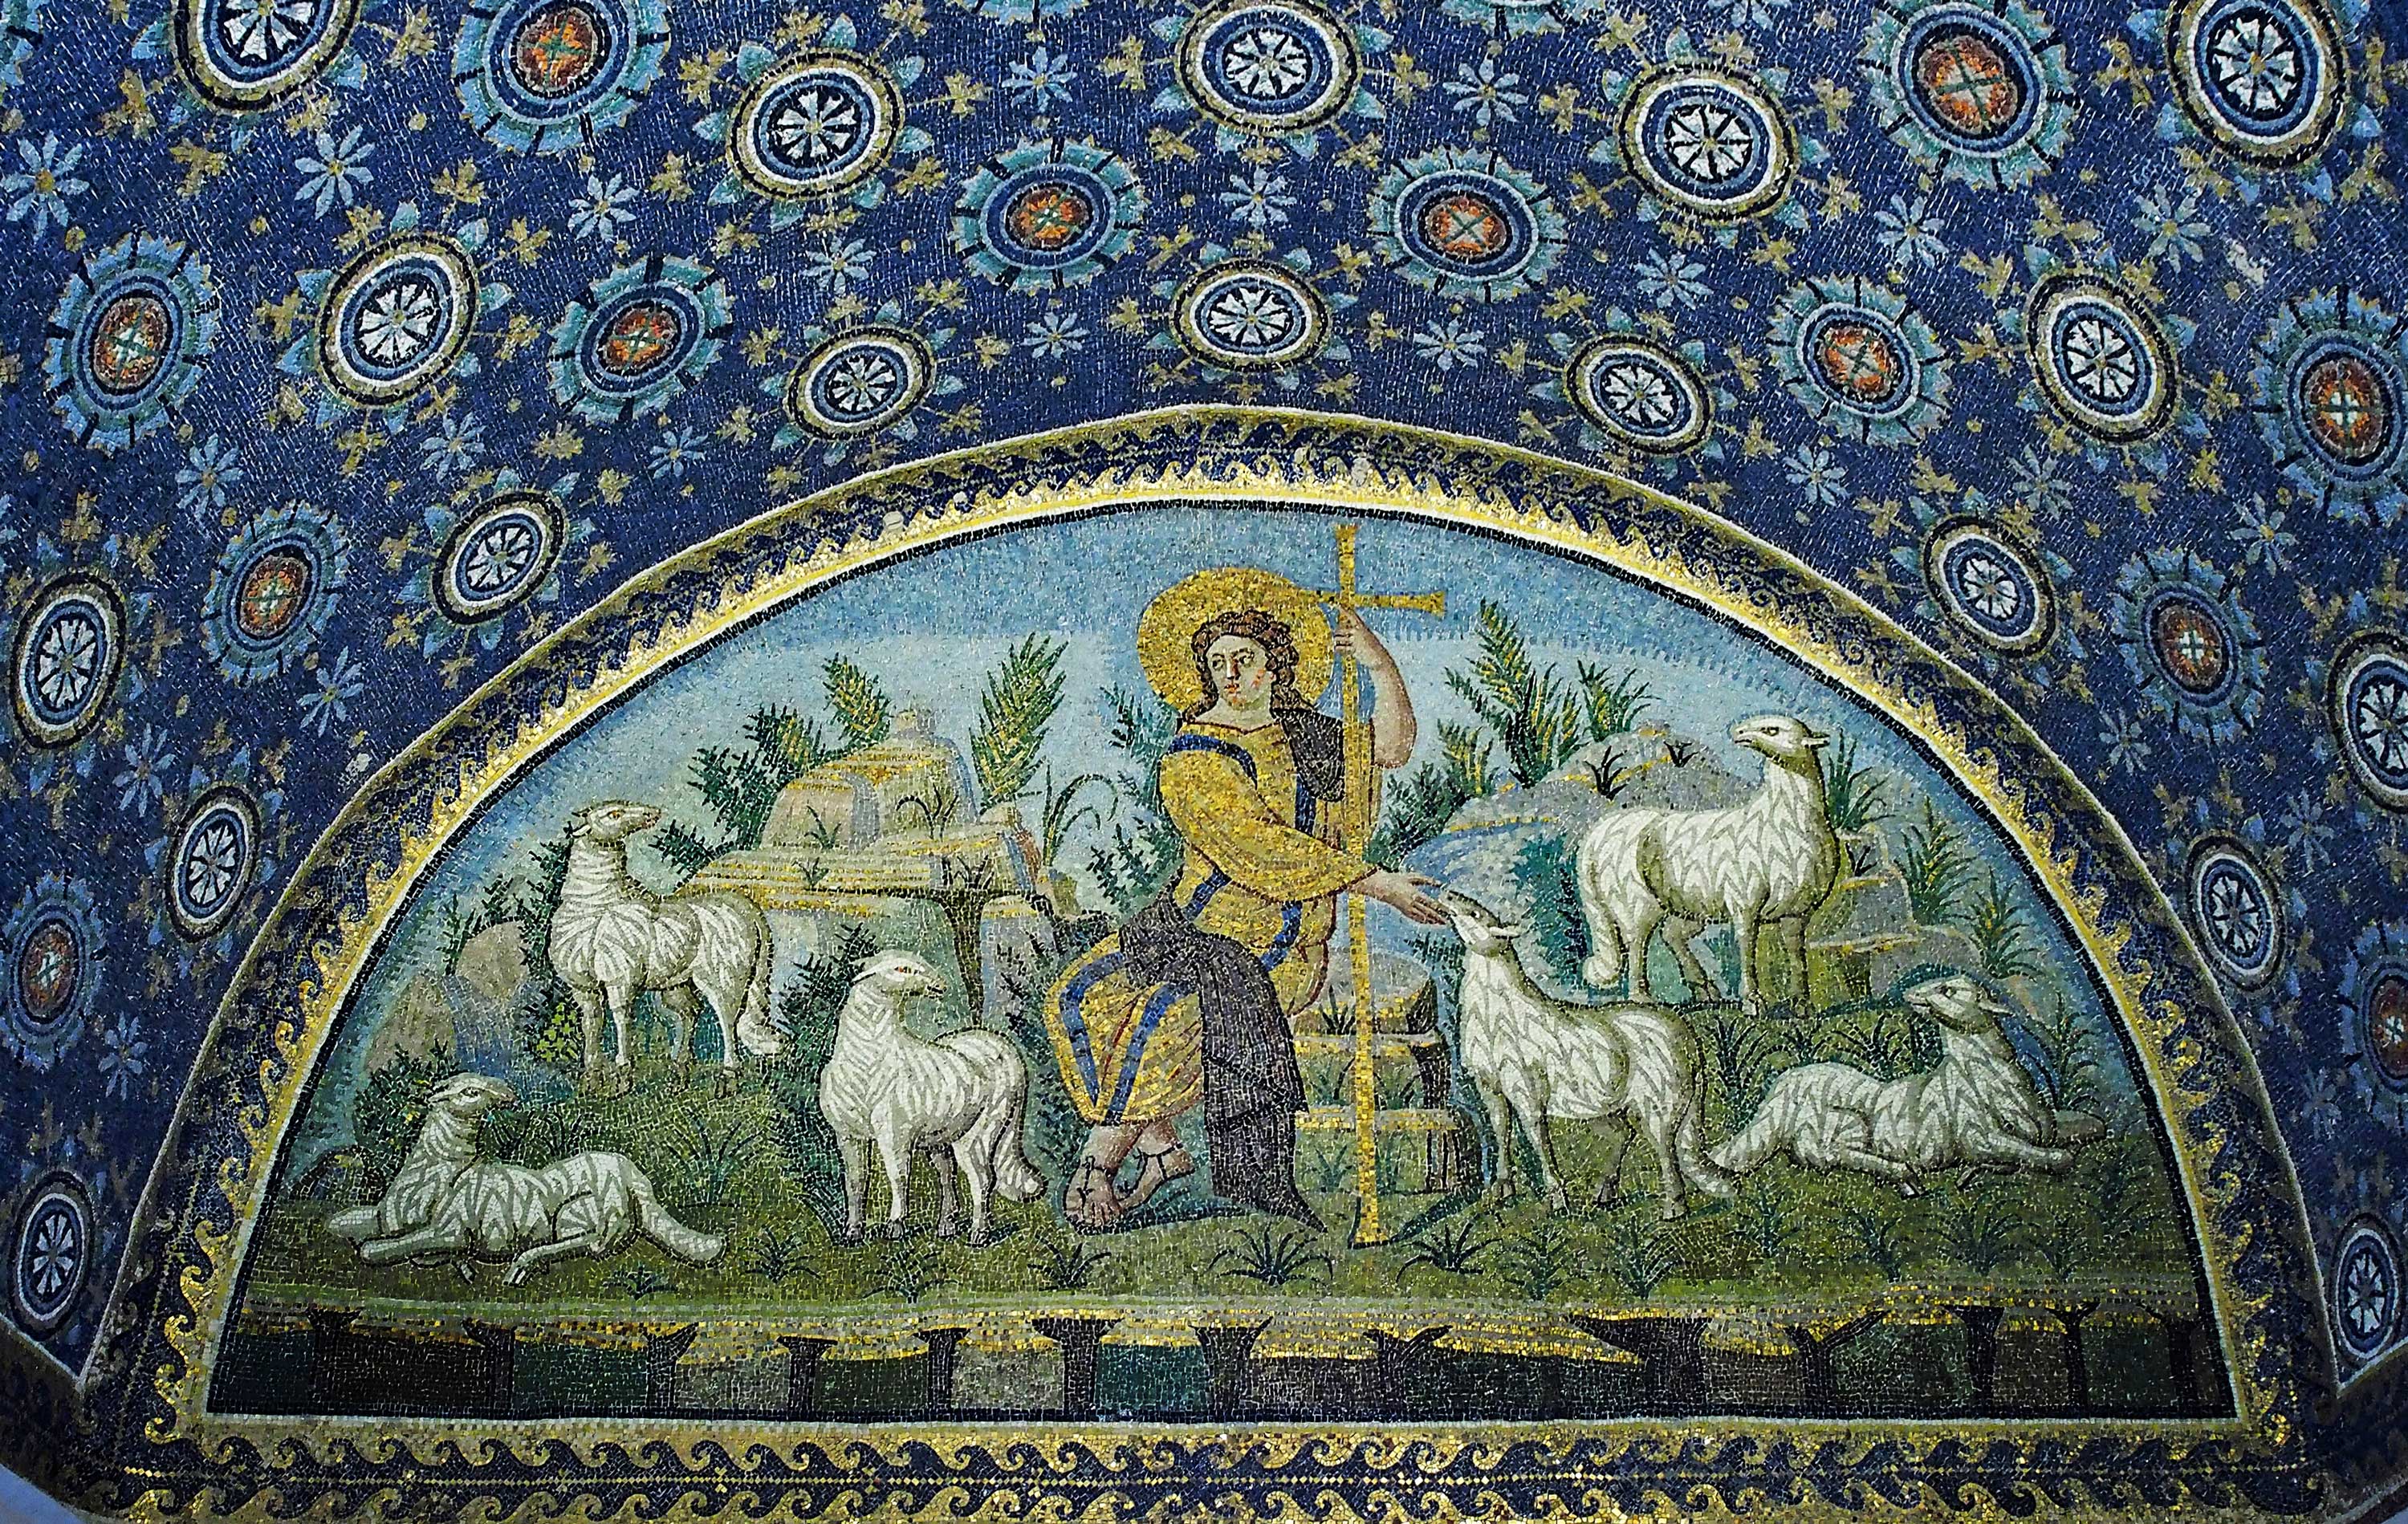 The good shepherd, mosaic in the Mausoleum of Galla Placidia, Ravenna, Italy (from around 425).